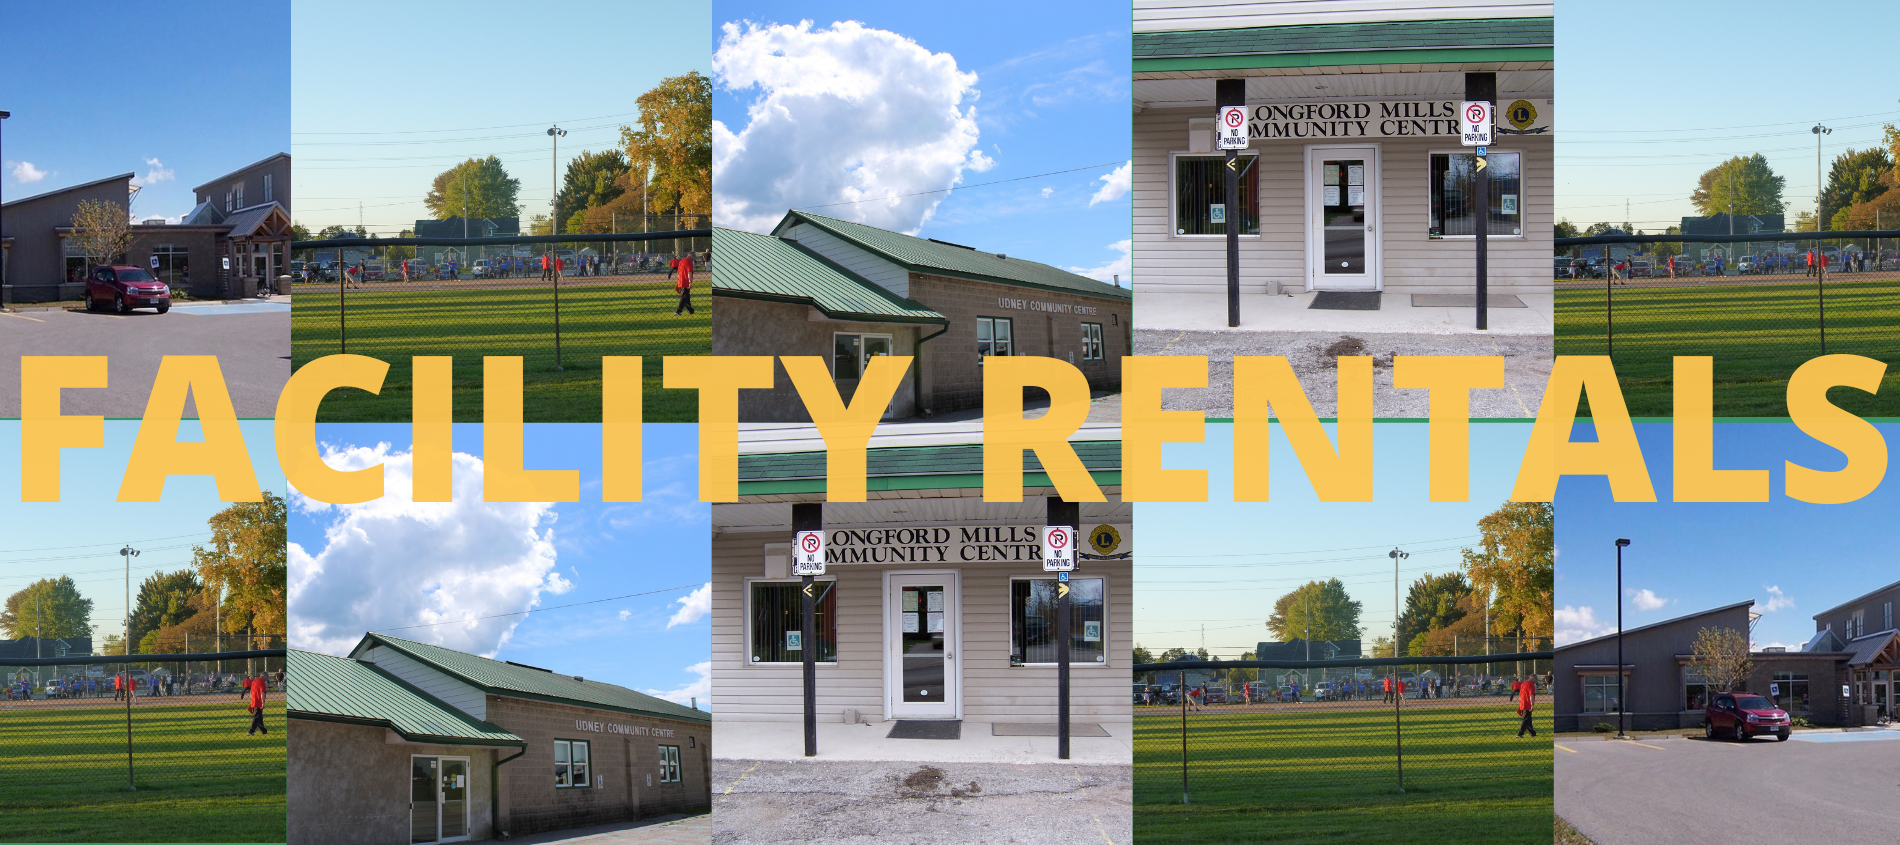 collage of township of ramara facilities with caption "Facility Rentals"